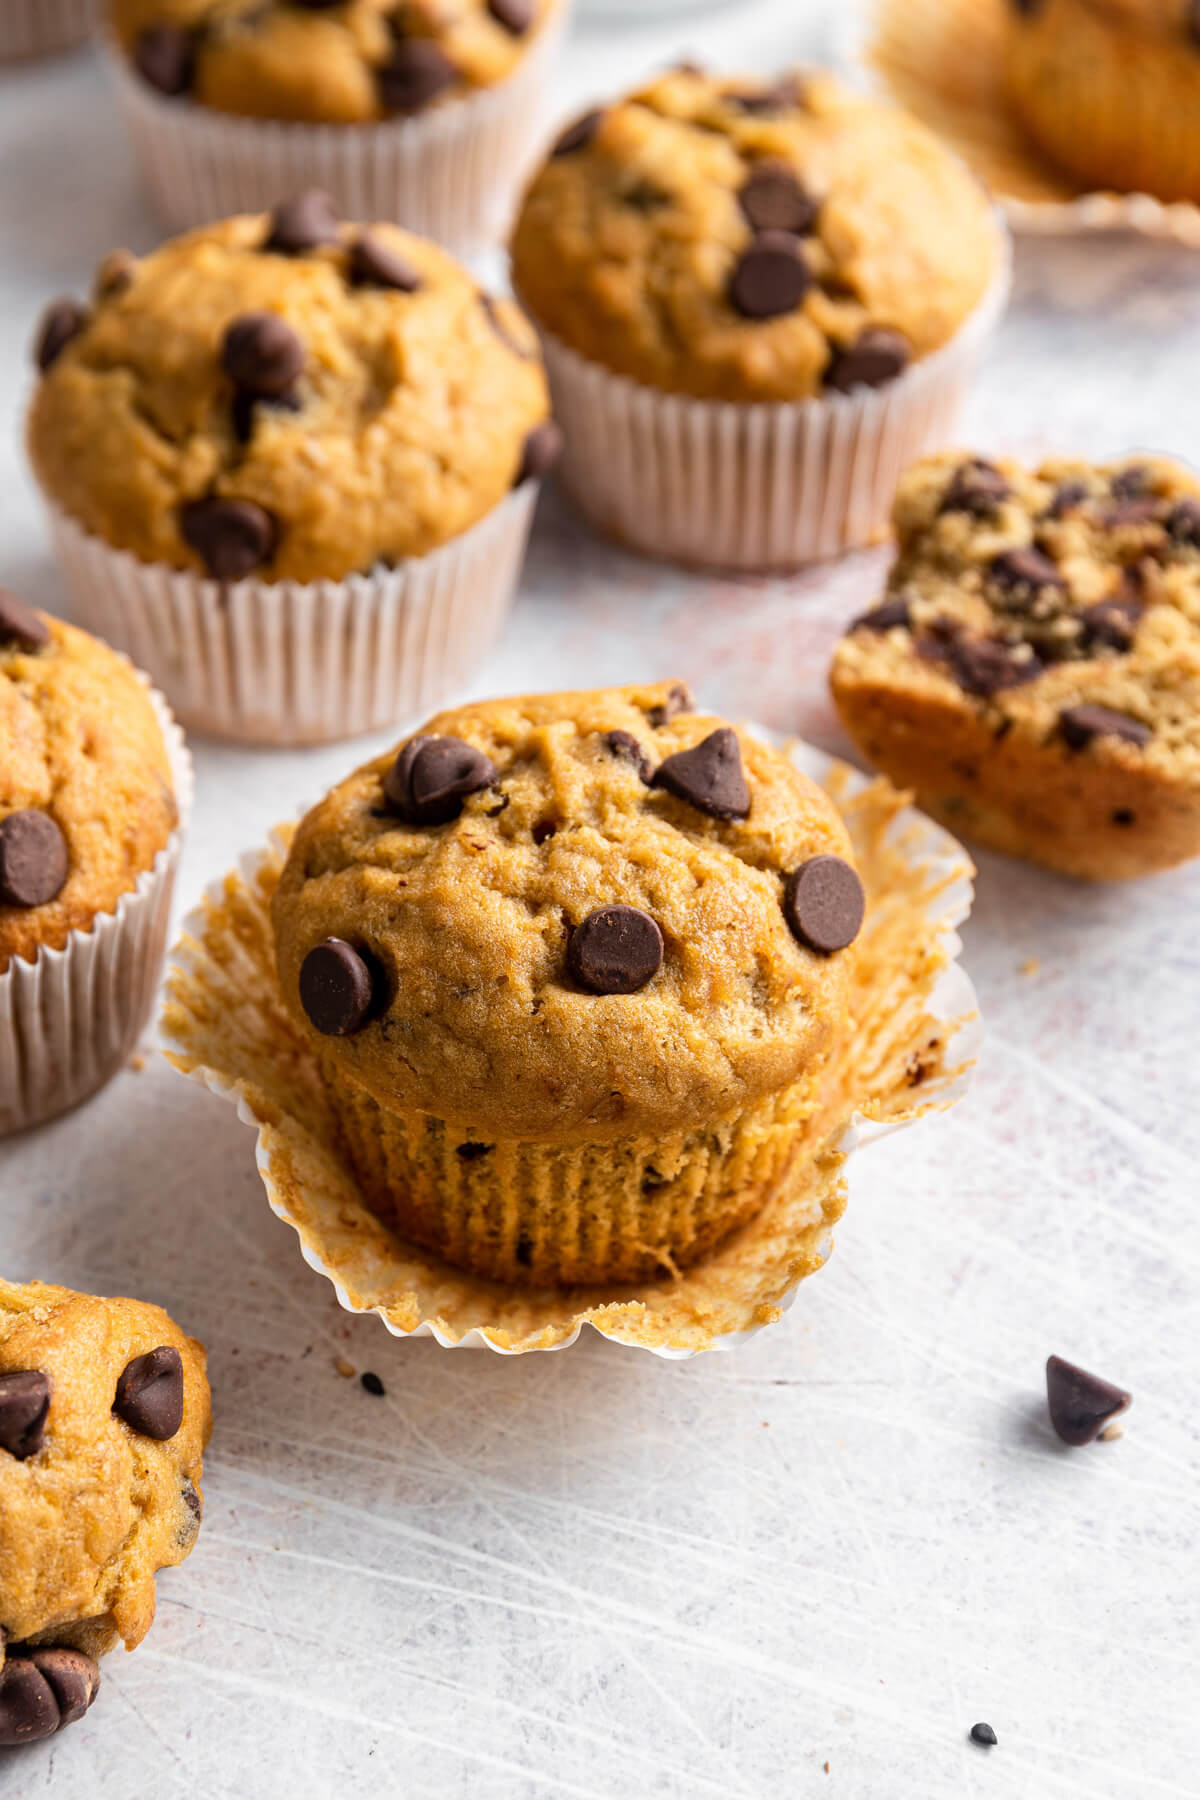 A golden baked Tahini Chocolate Chip Banana Muffin with loose muffin paper.